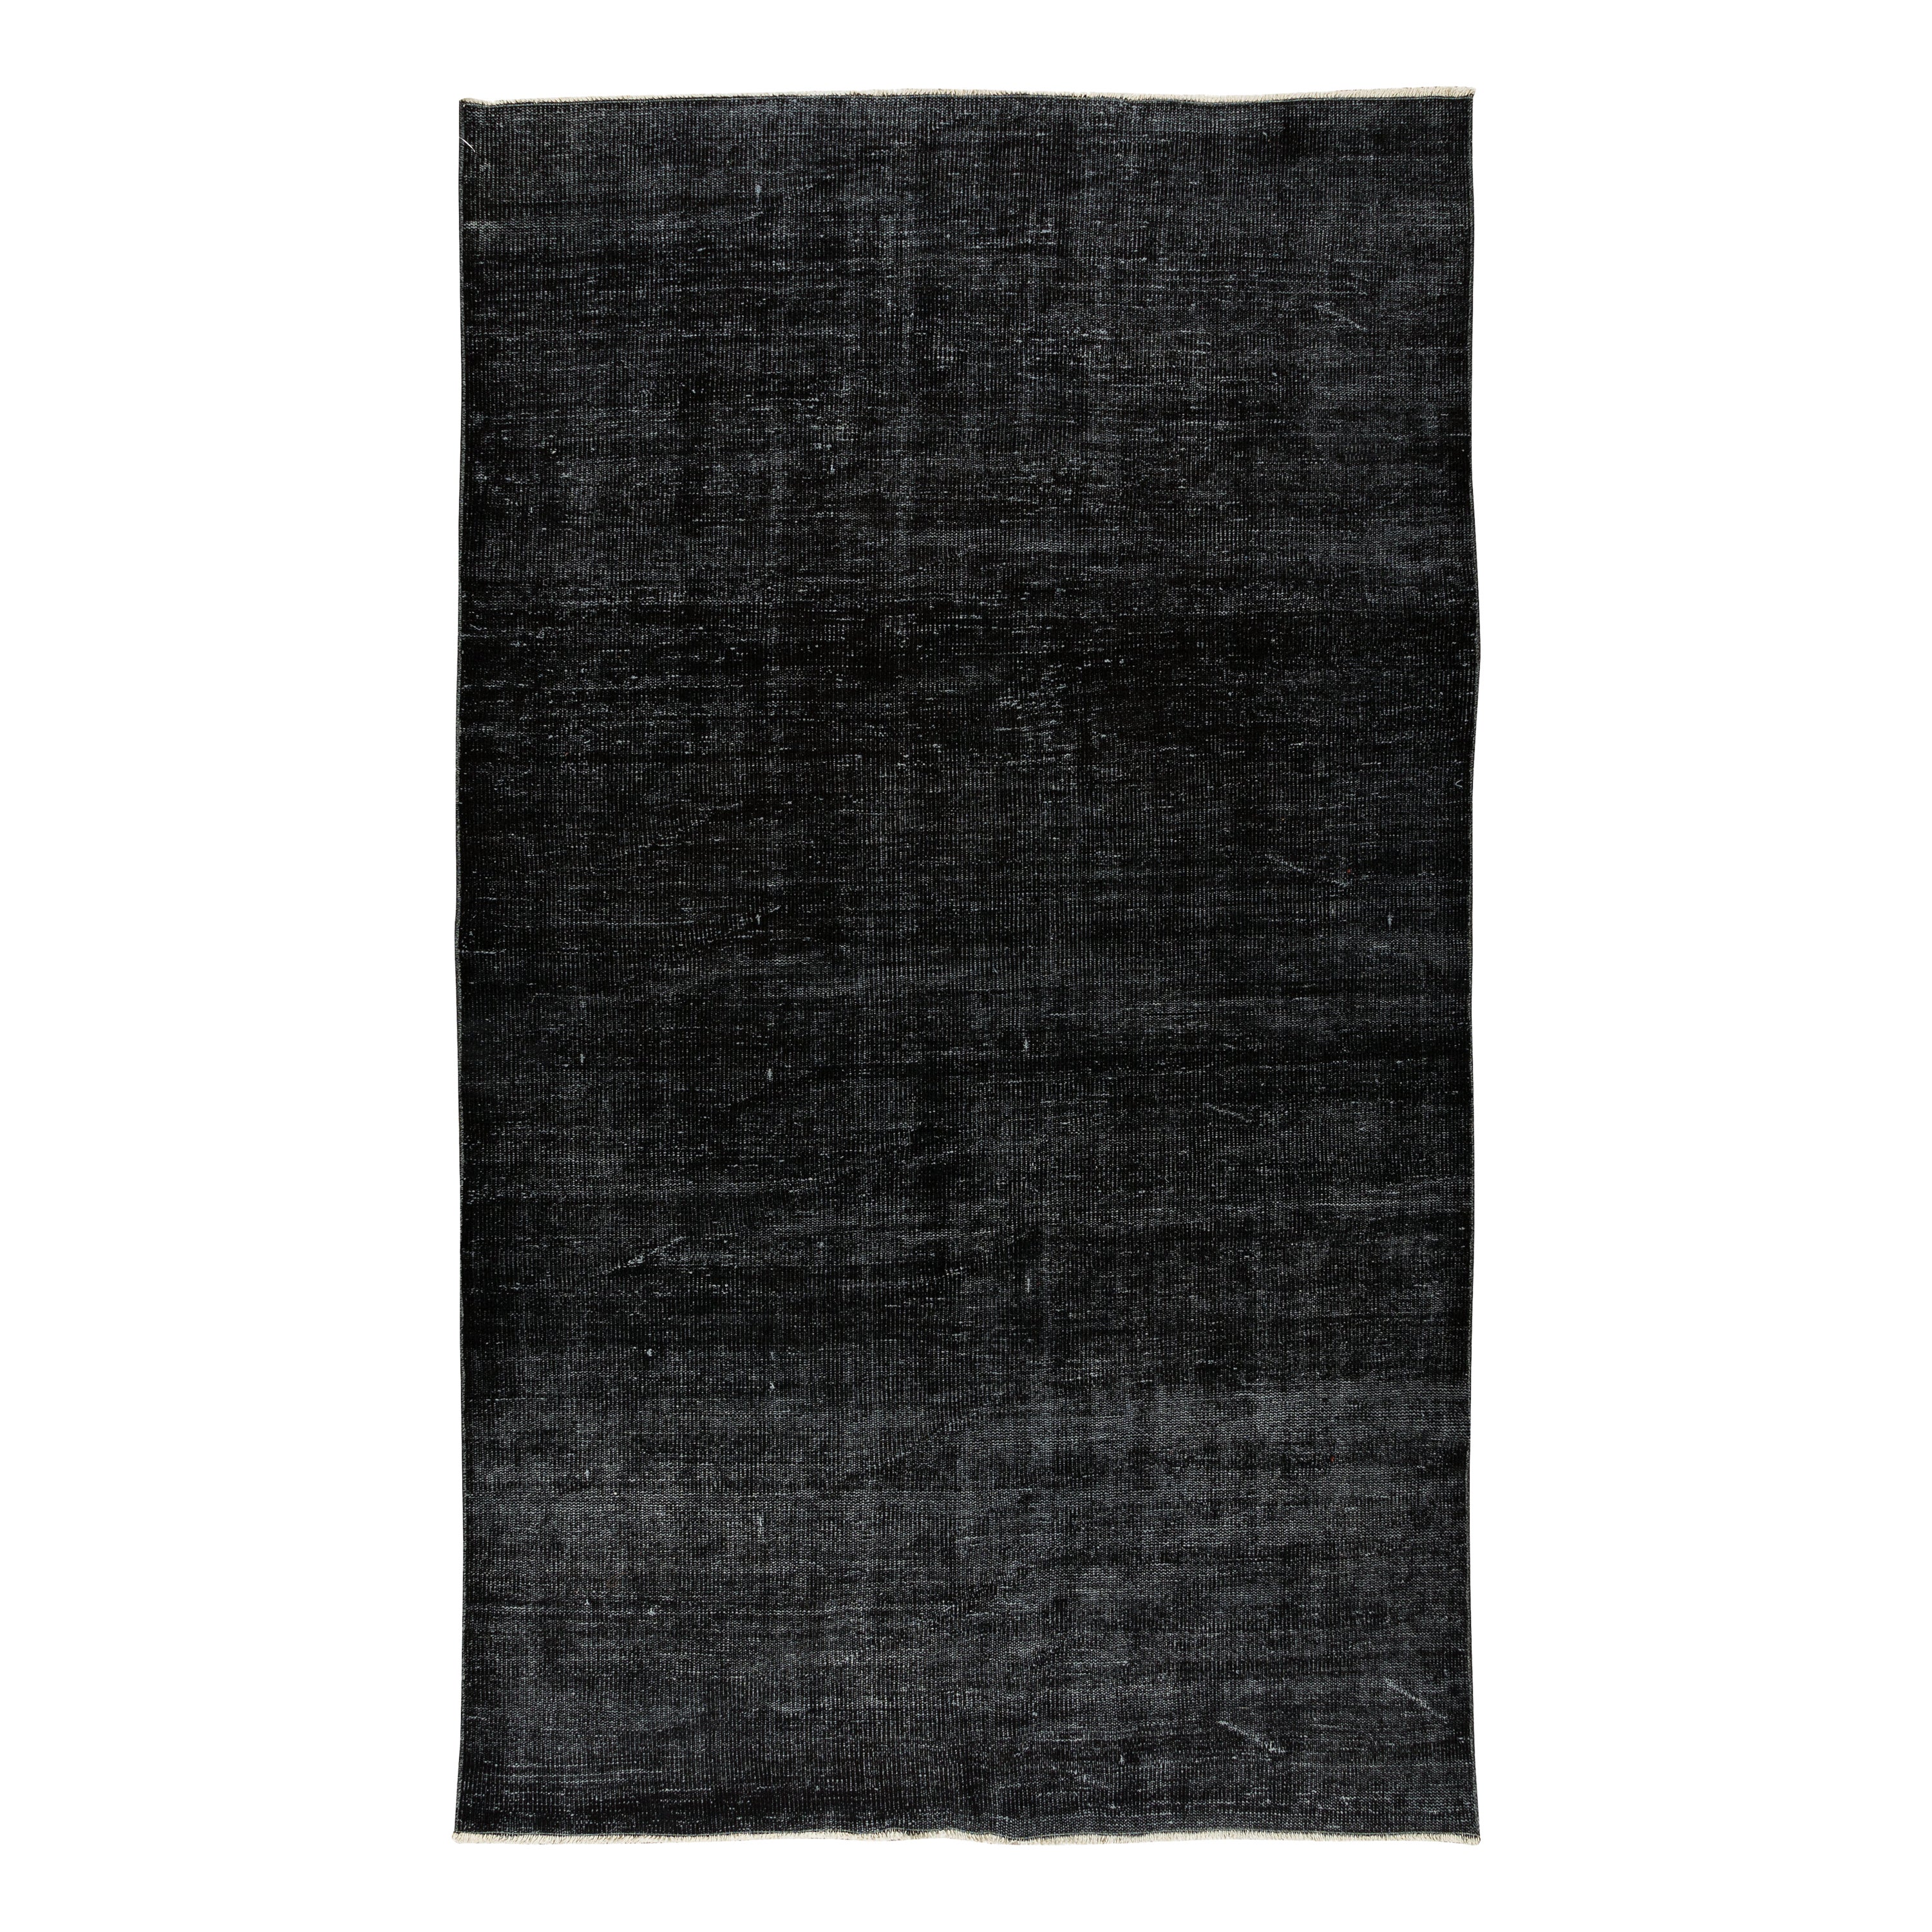 5.5x9.2 Ft Solid Black Area Rug made of wool and cotton, Hand-Knotted in Turkey For Sale